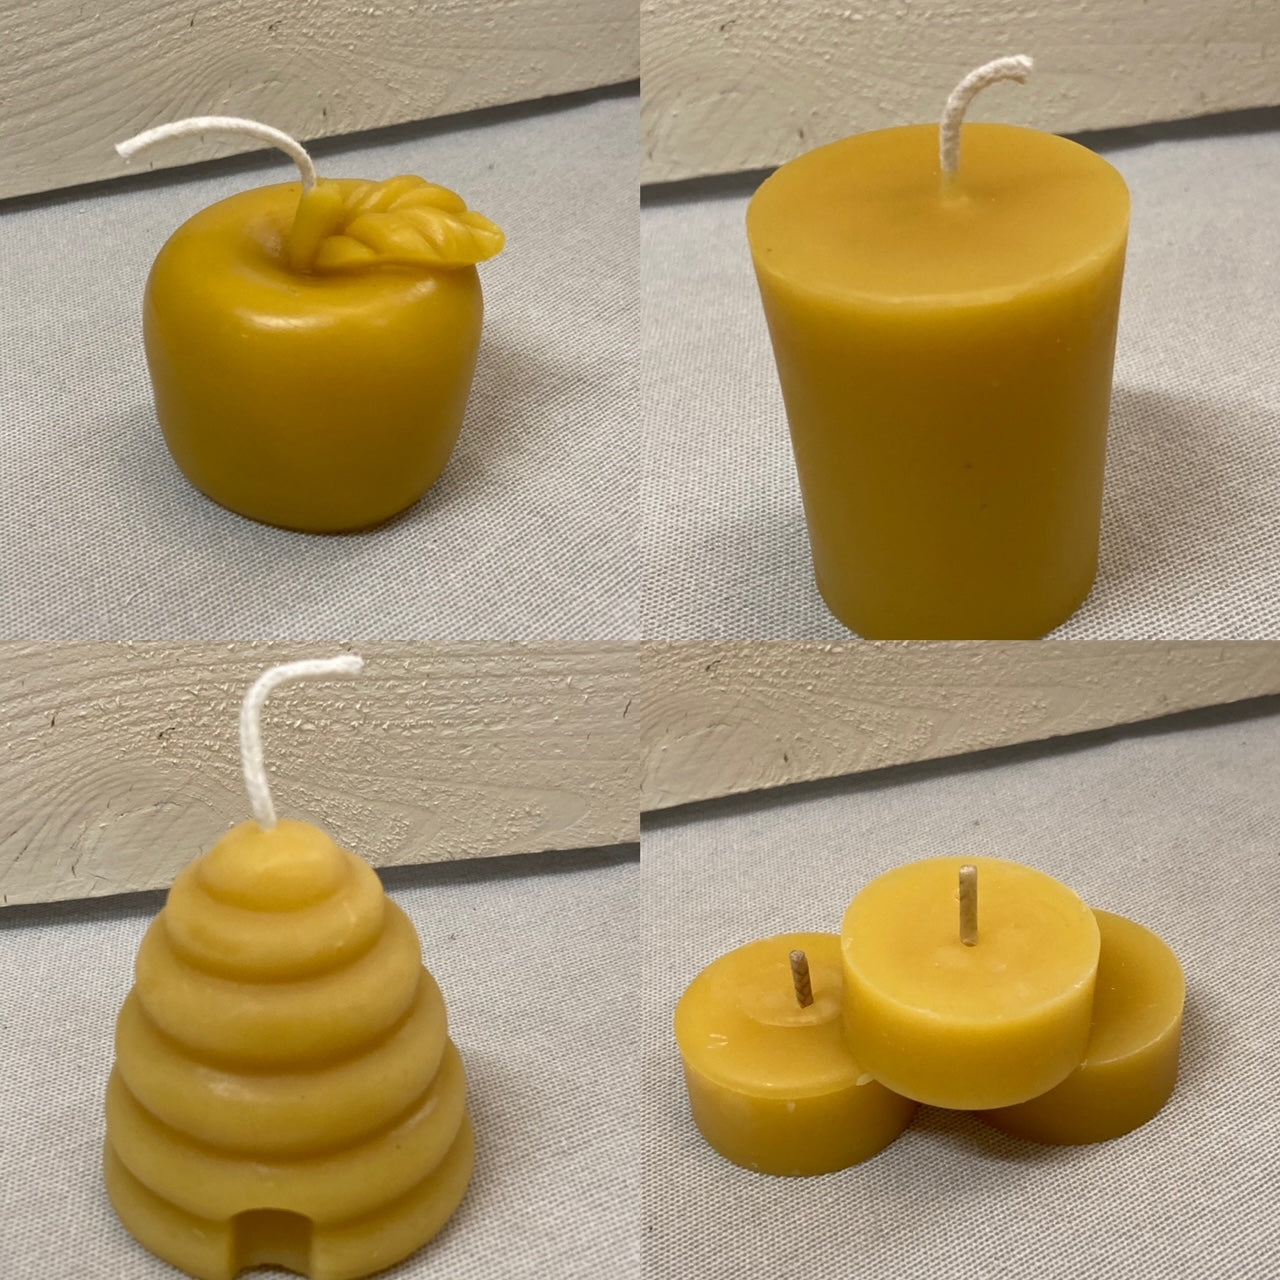 Beeswax candle options: Upper Left: Apple Right: Votive Lower Left: Hive Candle, RIght: Tea lights